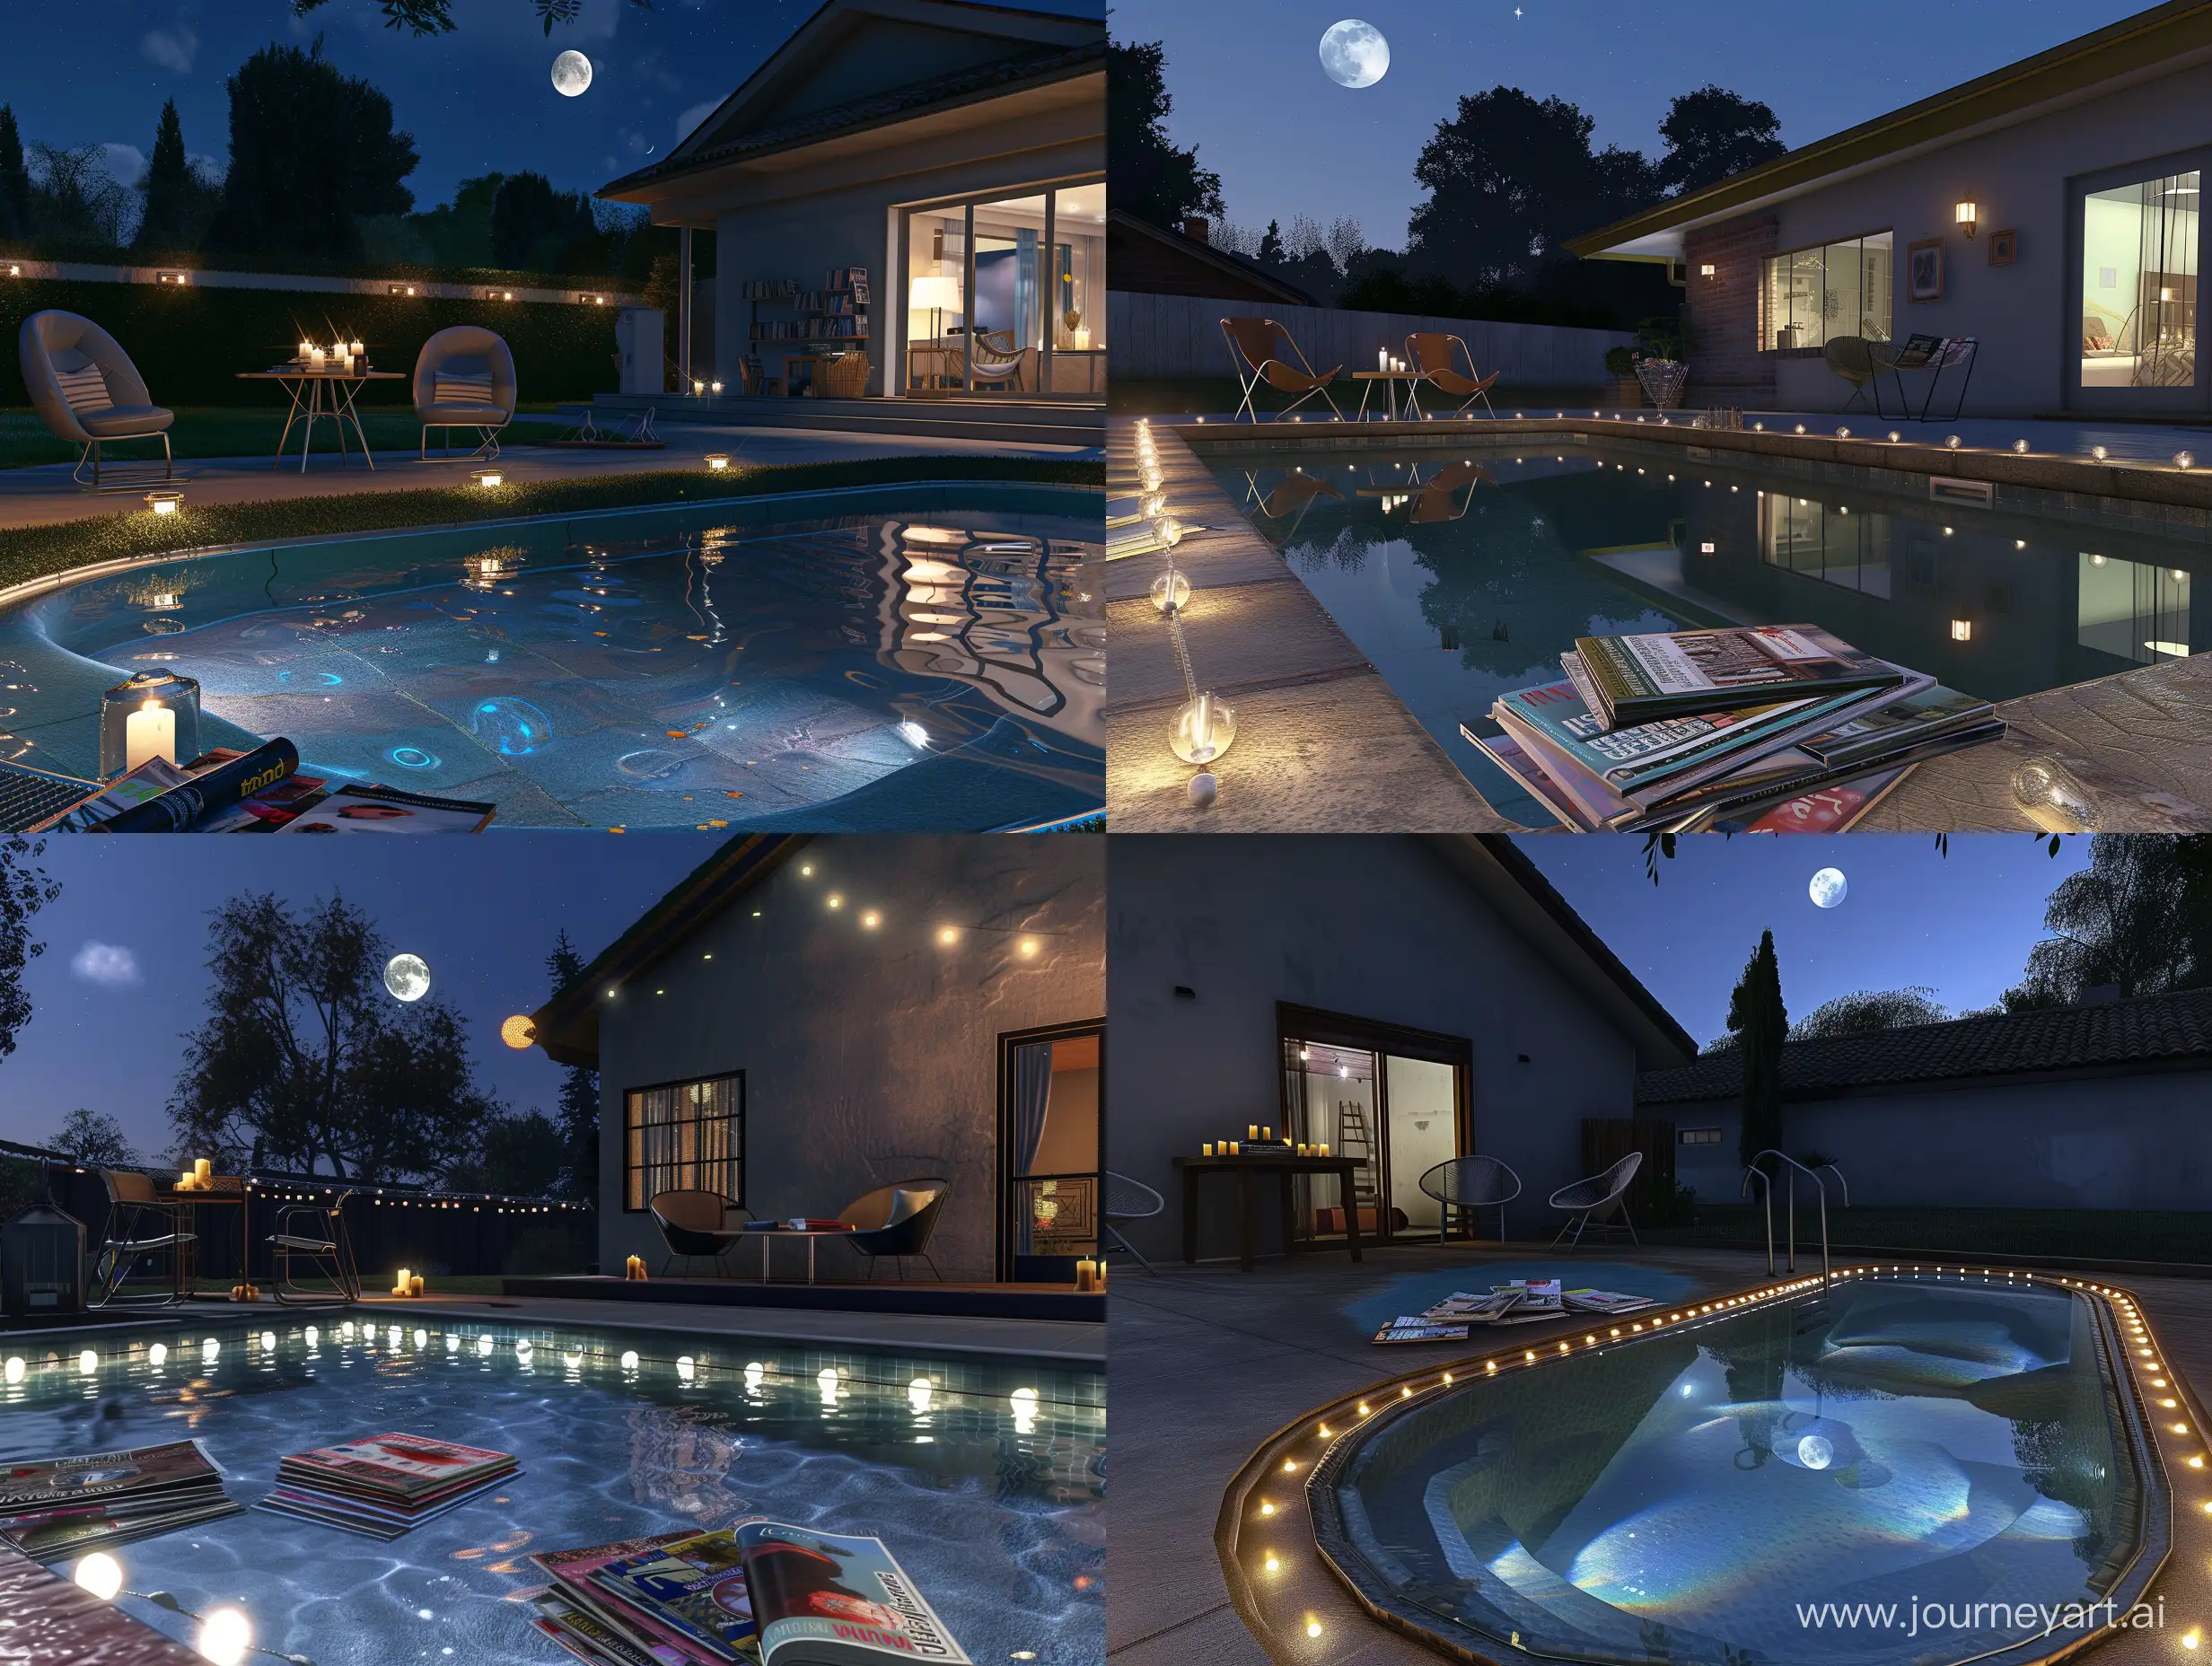 beautiful american house at night. a backyard a small swimming pool, with beautiful edging, desighned lights reflecting in the transparent water. near is a little table with magazines and candles. there are two design chairs near the table. 8 to ultrarealism, unreal engine, clear objects, beautiful nihgt skies with moon